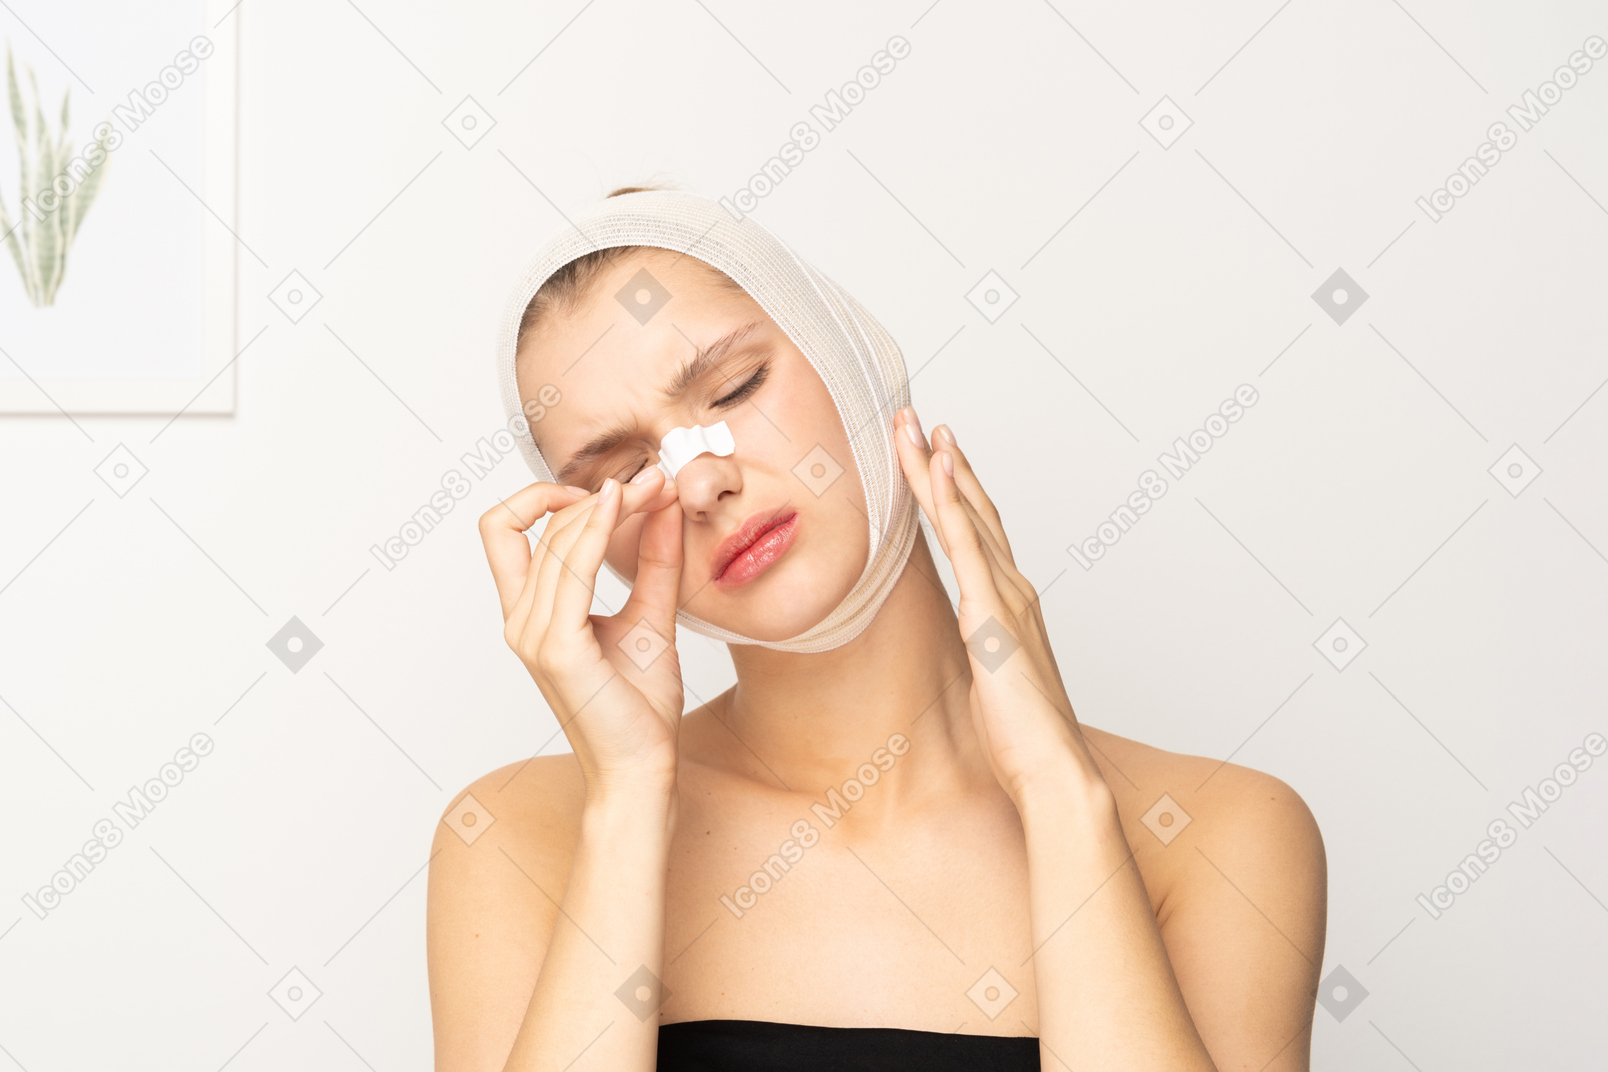 Young woman with bandaged head removing plaster